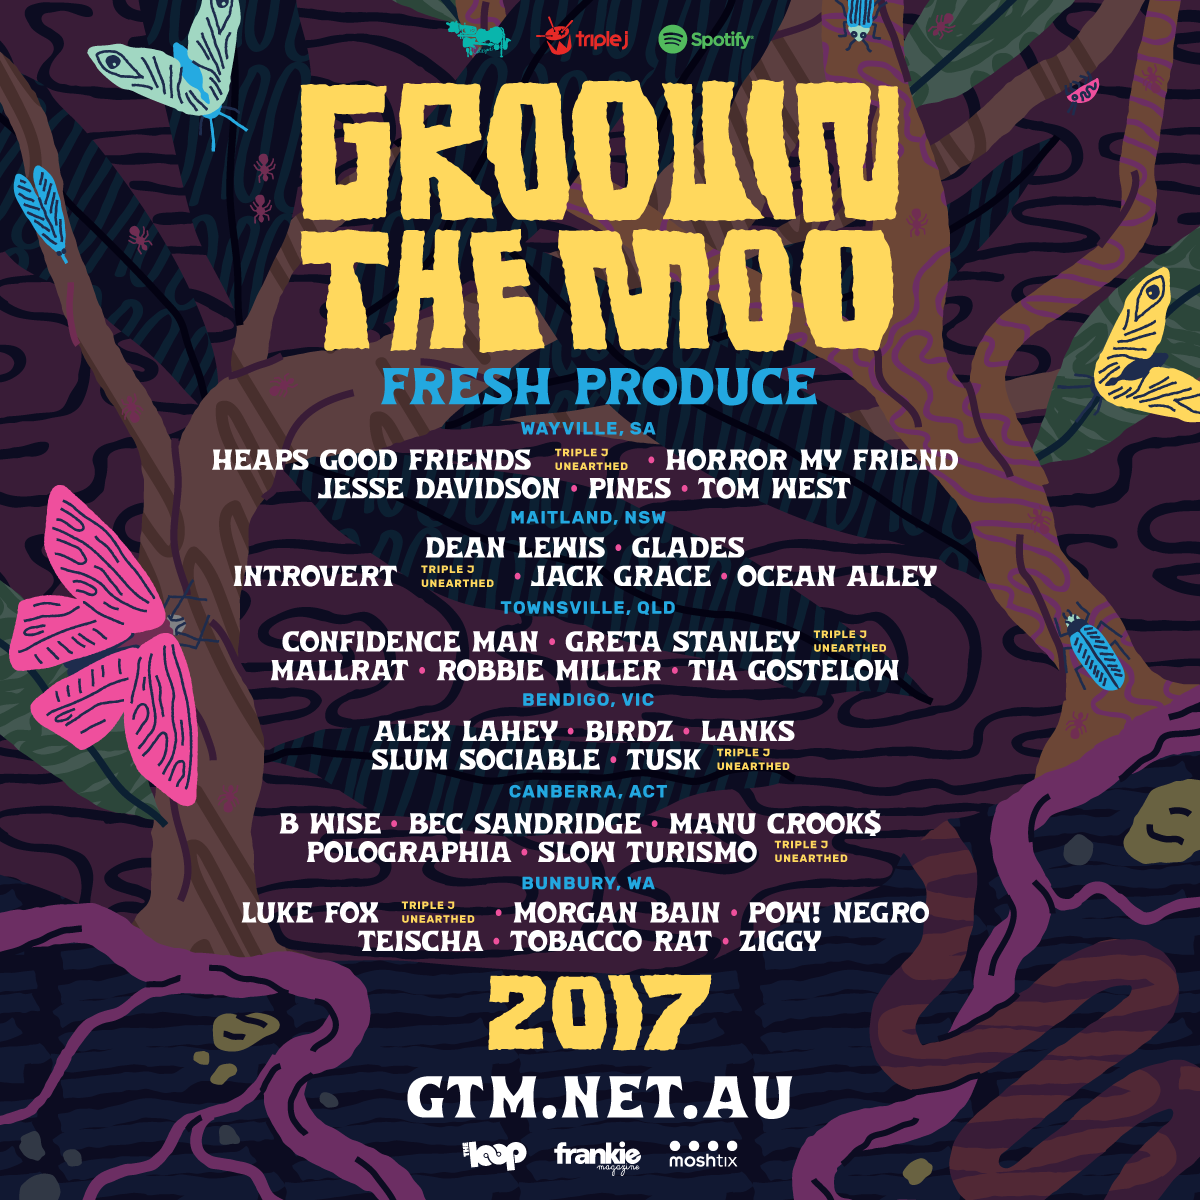 More artists added to Groovin The Moo Line-up.